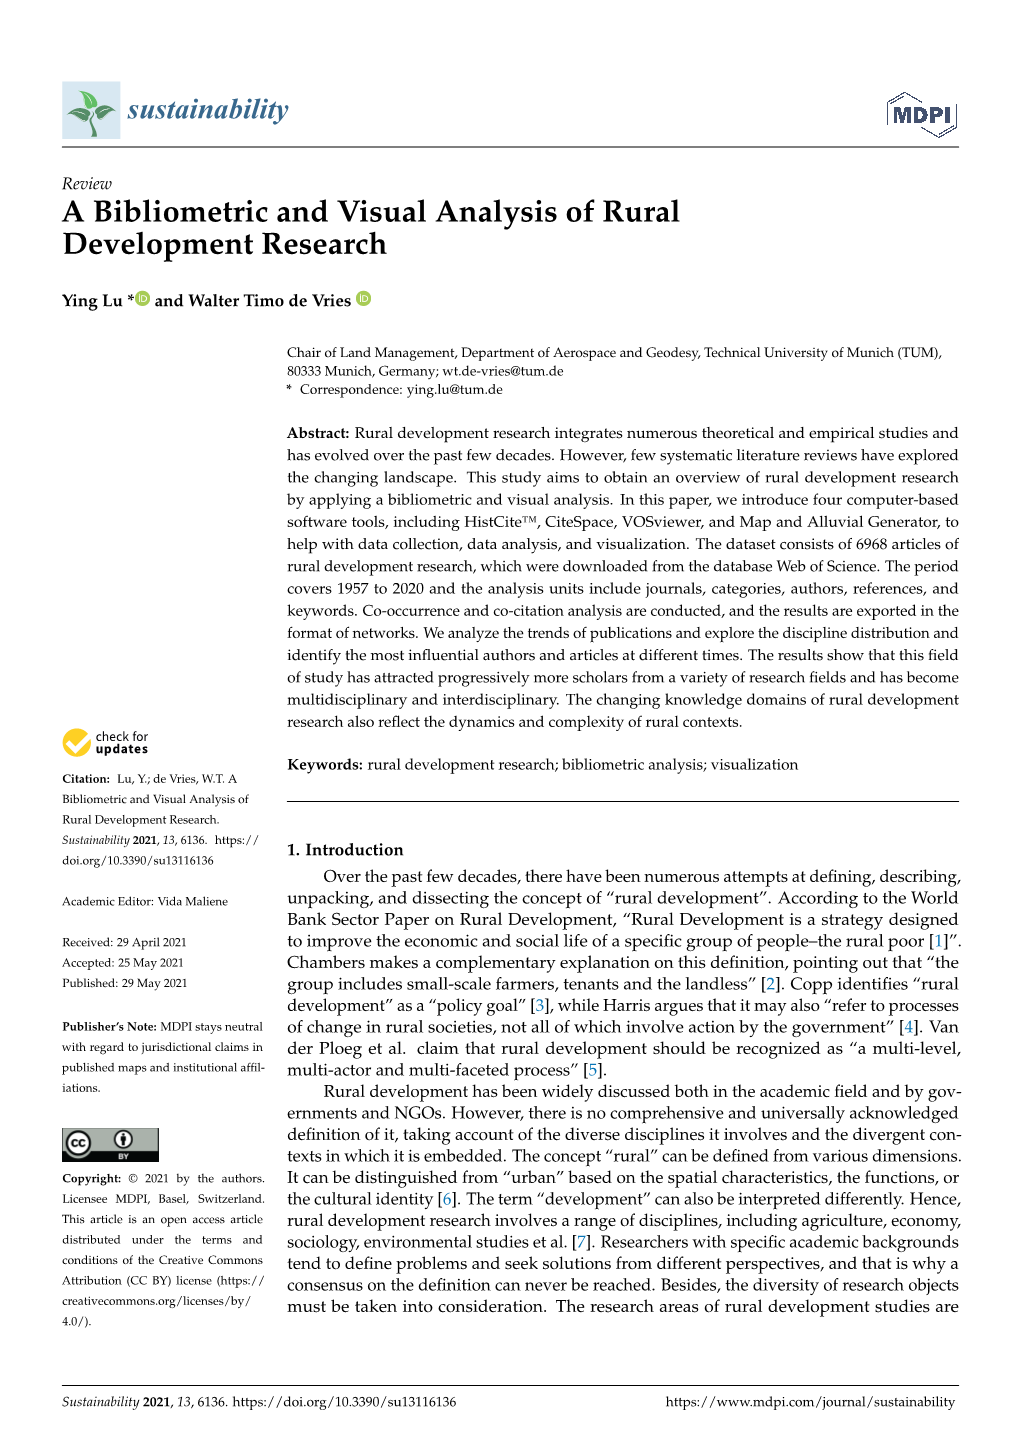 A Bibliometric and Visual Analysis of Rural Development Research